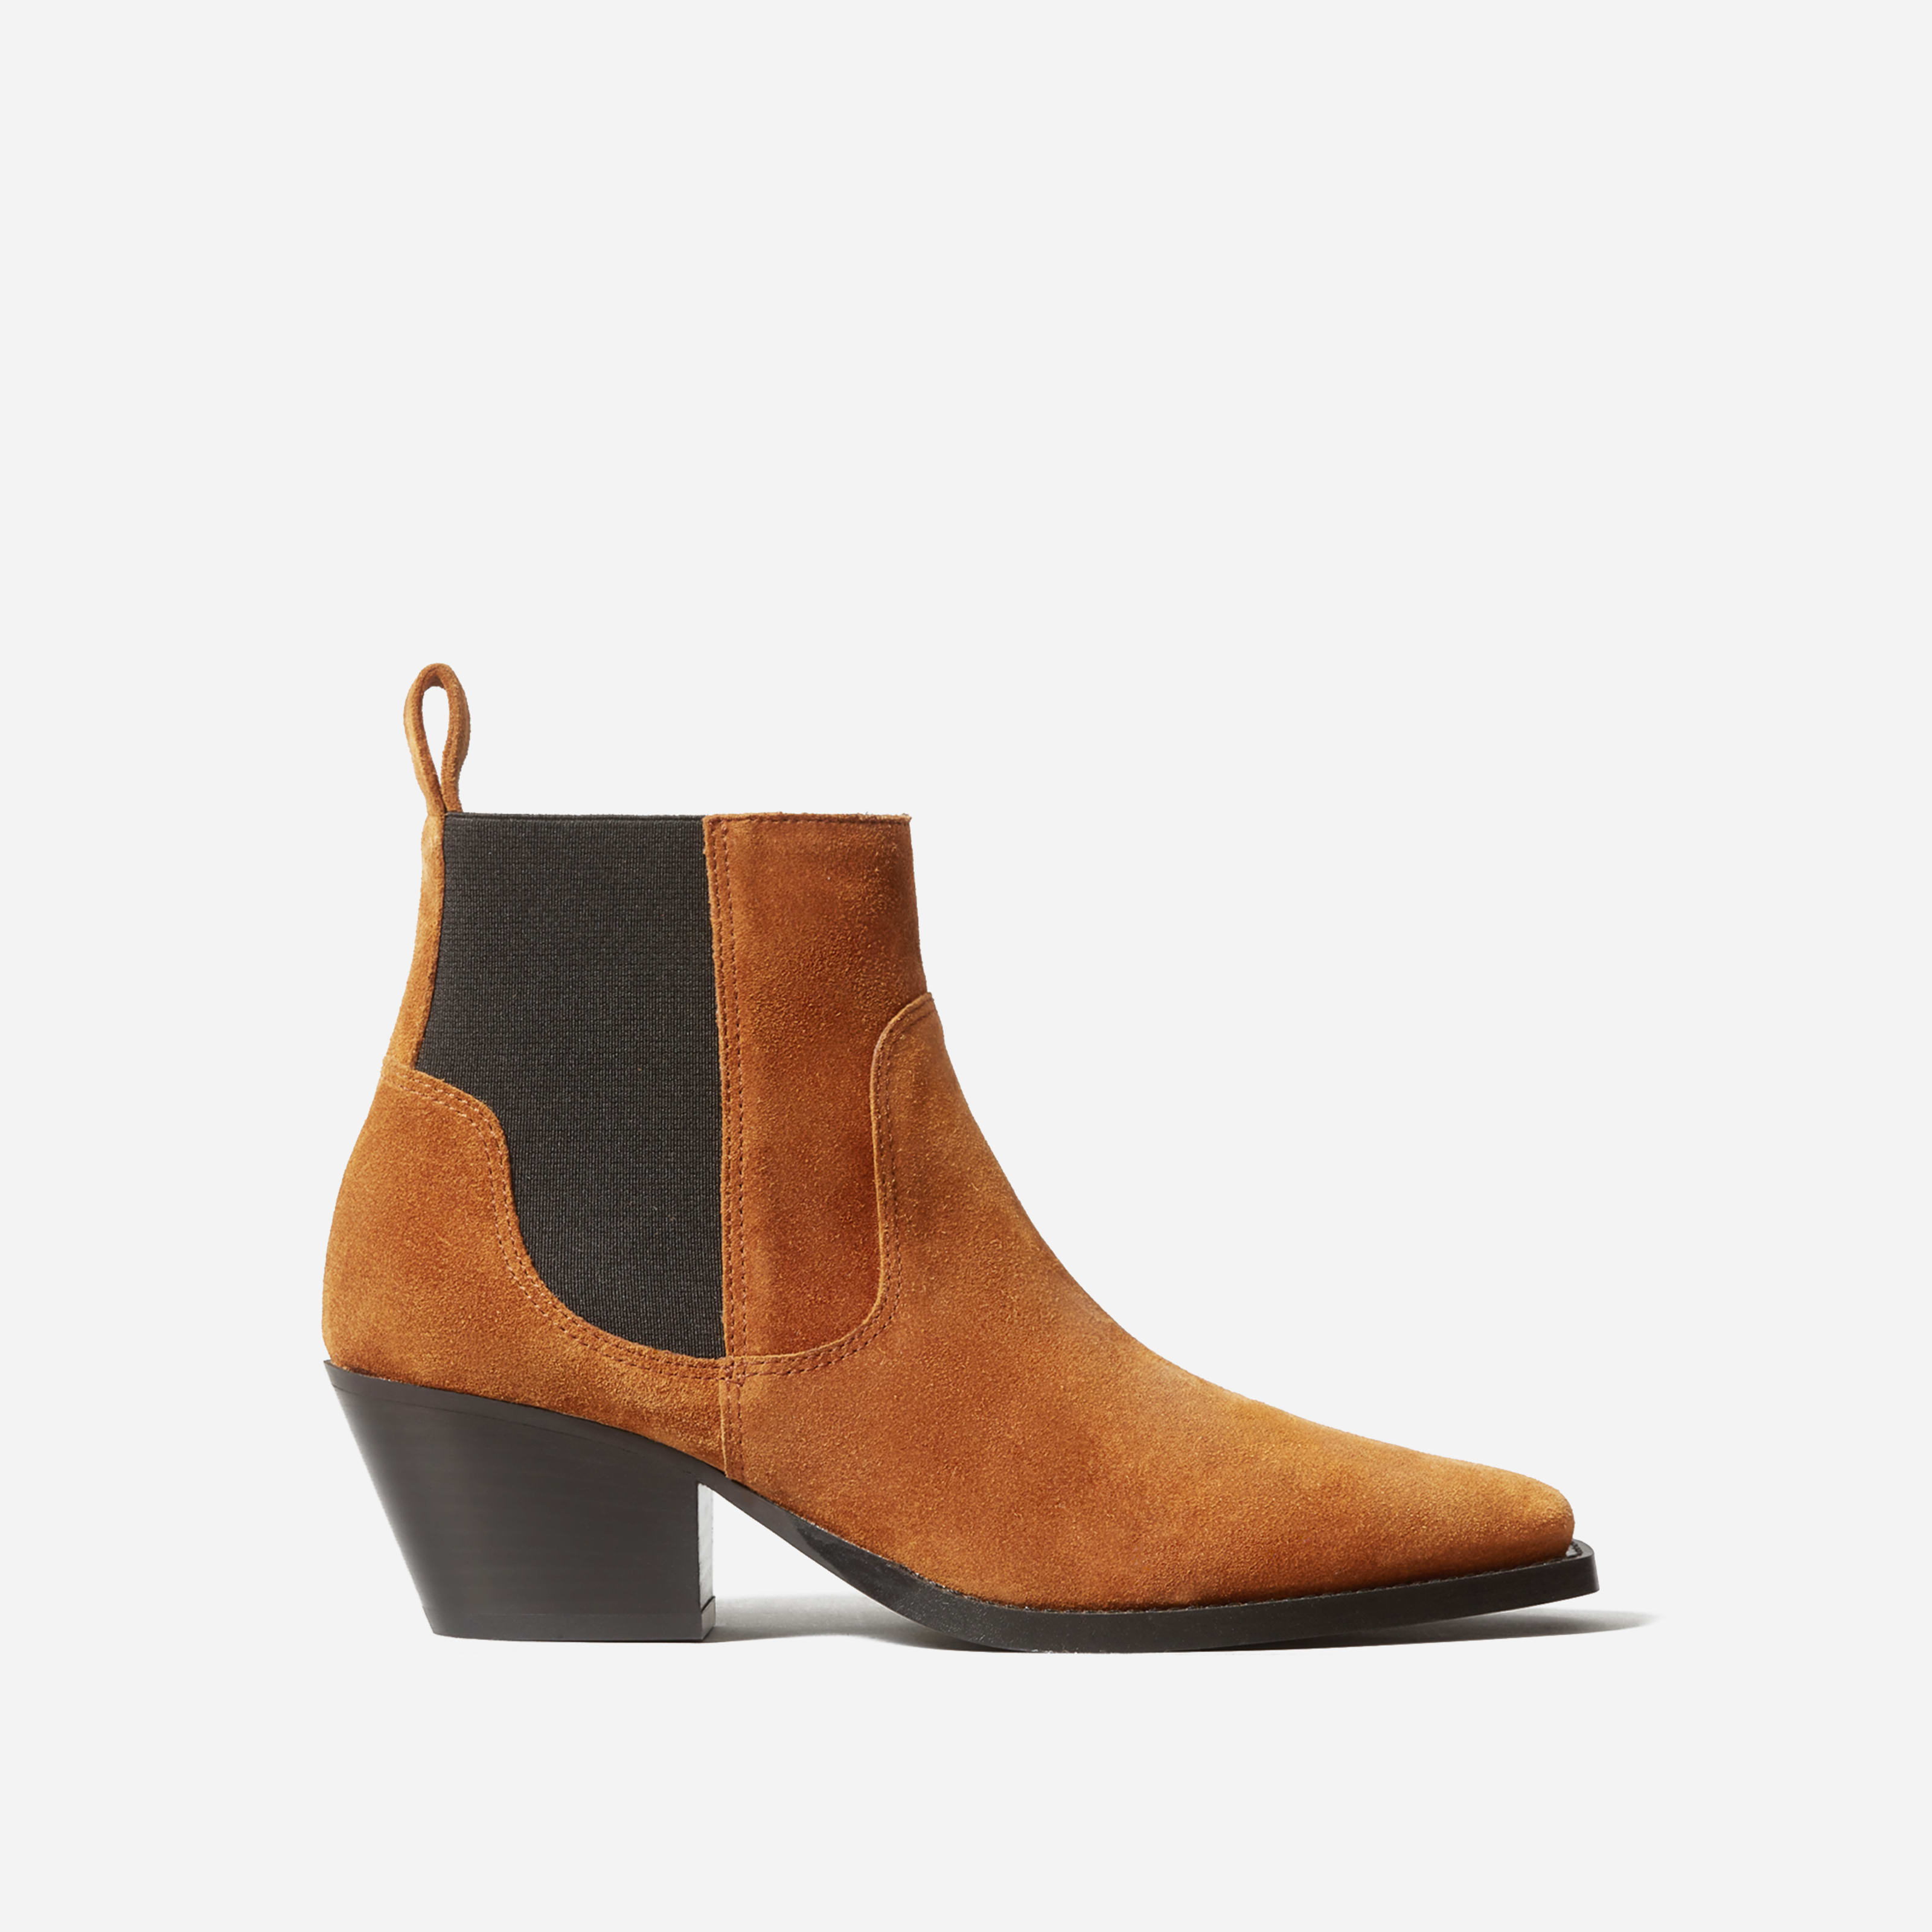 western boot by everlane in russet, size 6